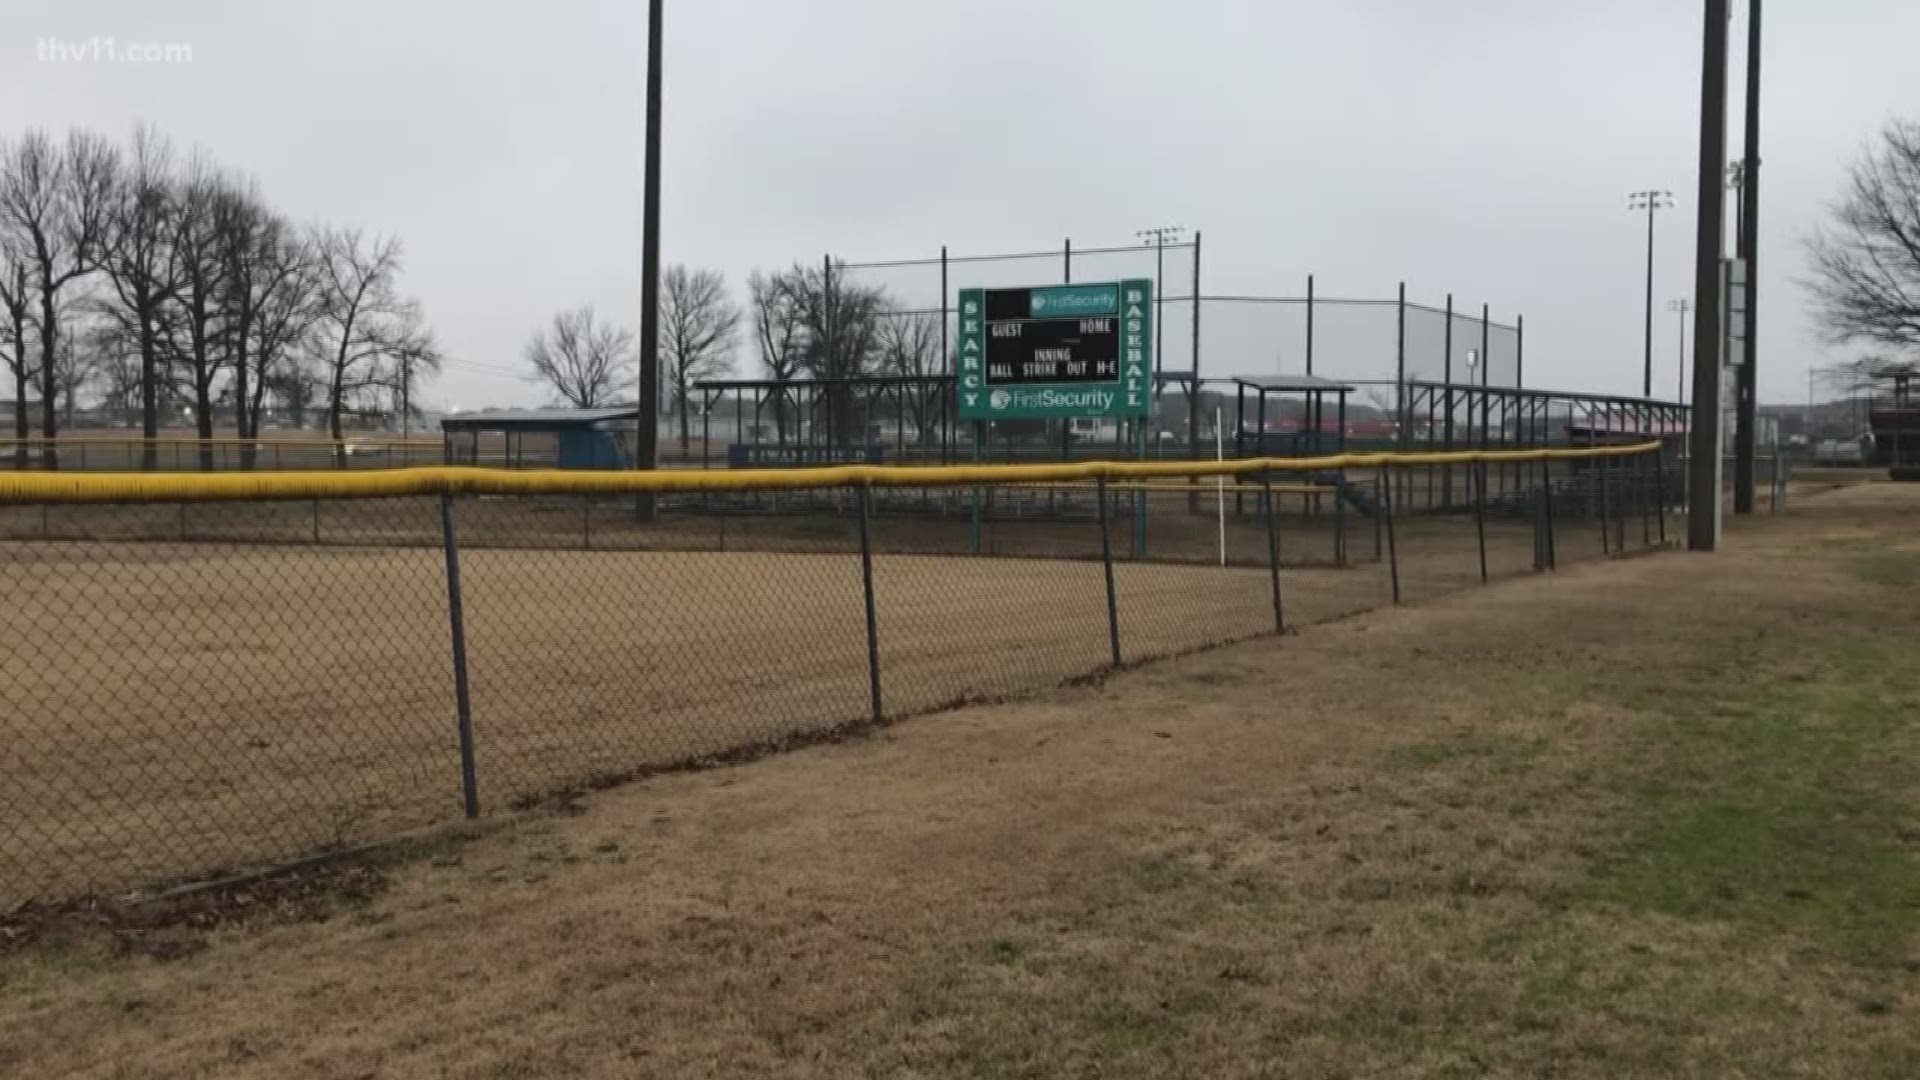 Kyle Osborne said volunteer group's stewardship allowed baseball complex to decay, causing some parents to enroll their children in other cities' programs.